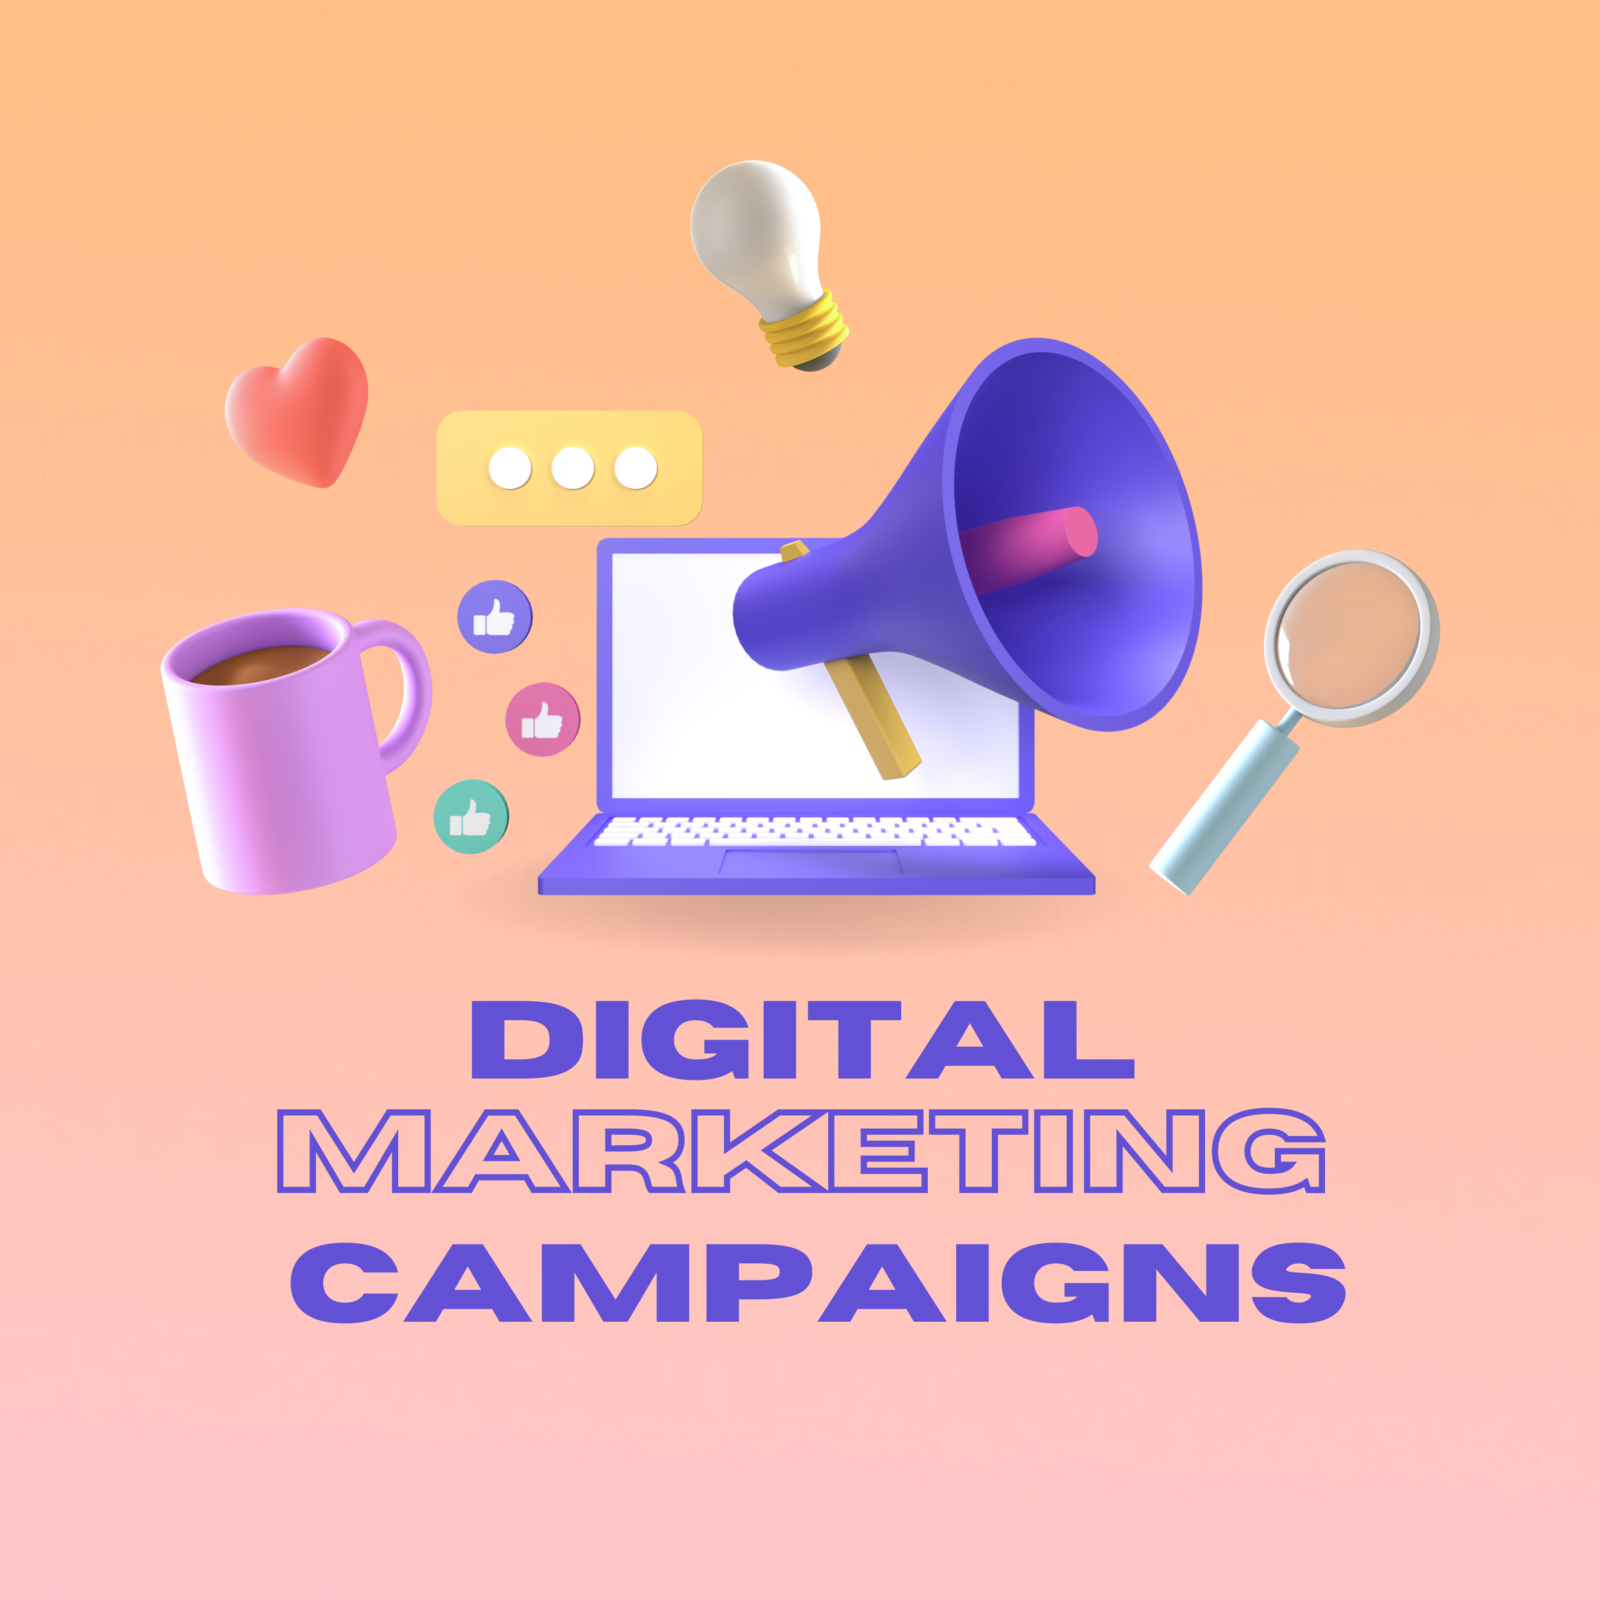 Digital Marketing Campaigns in India